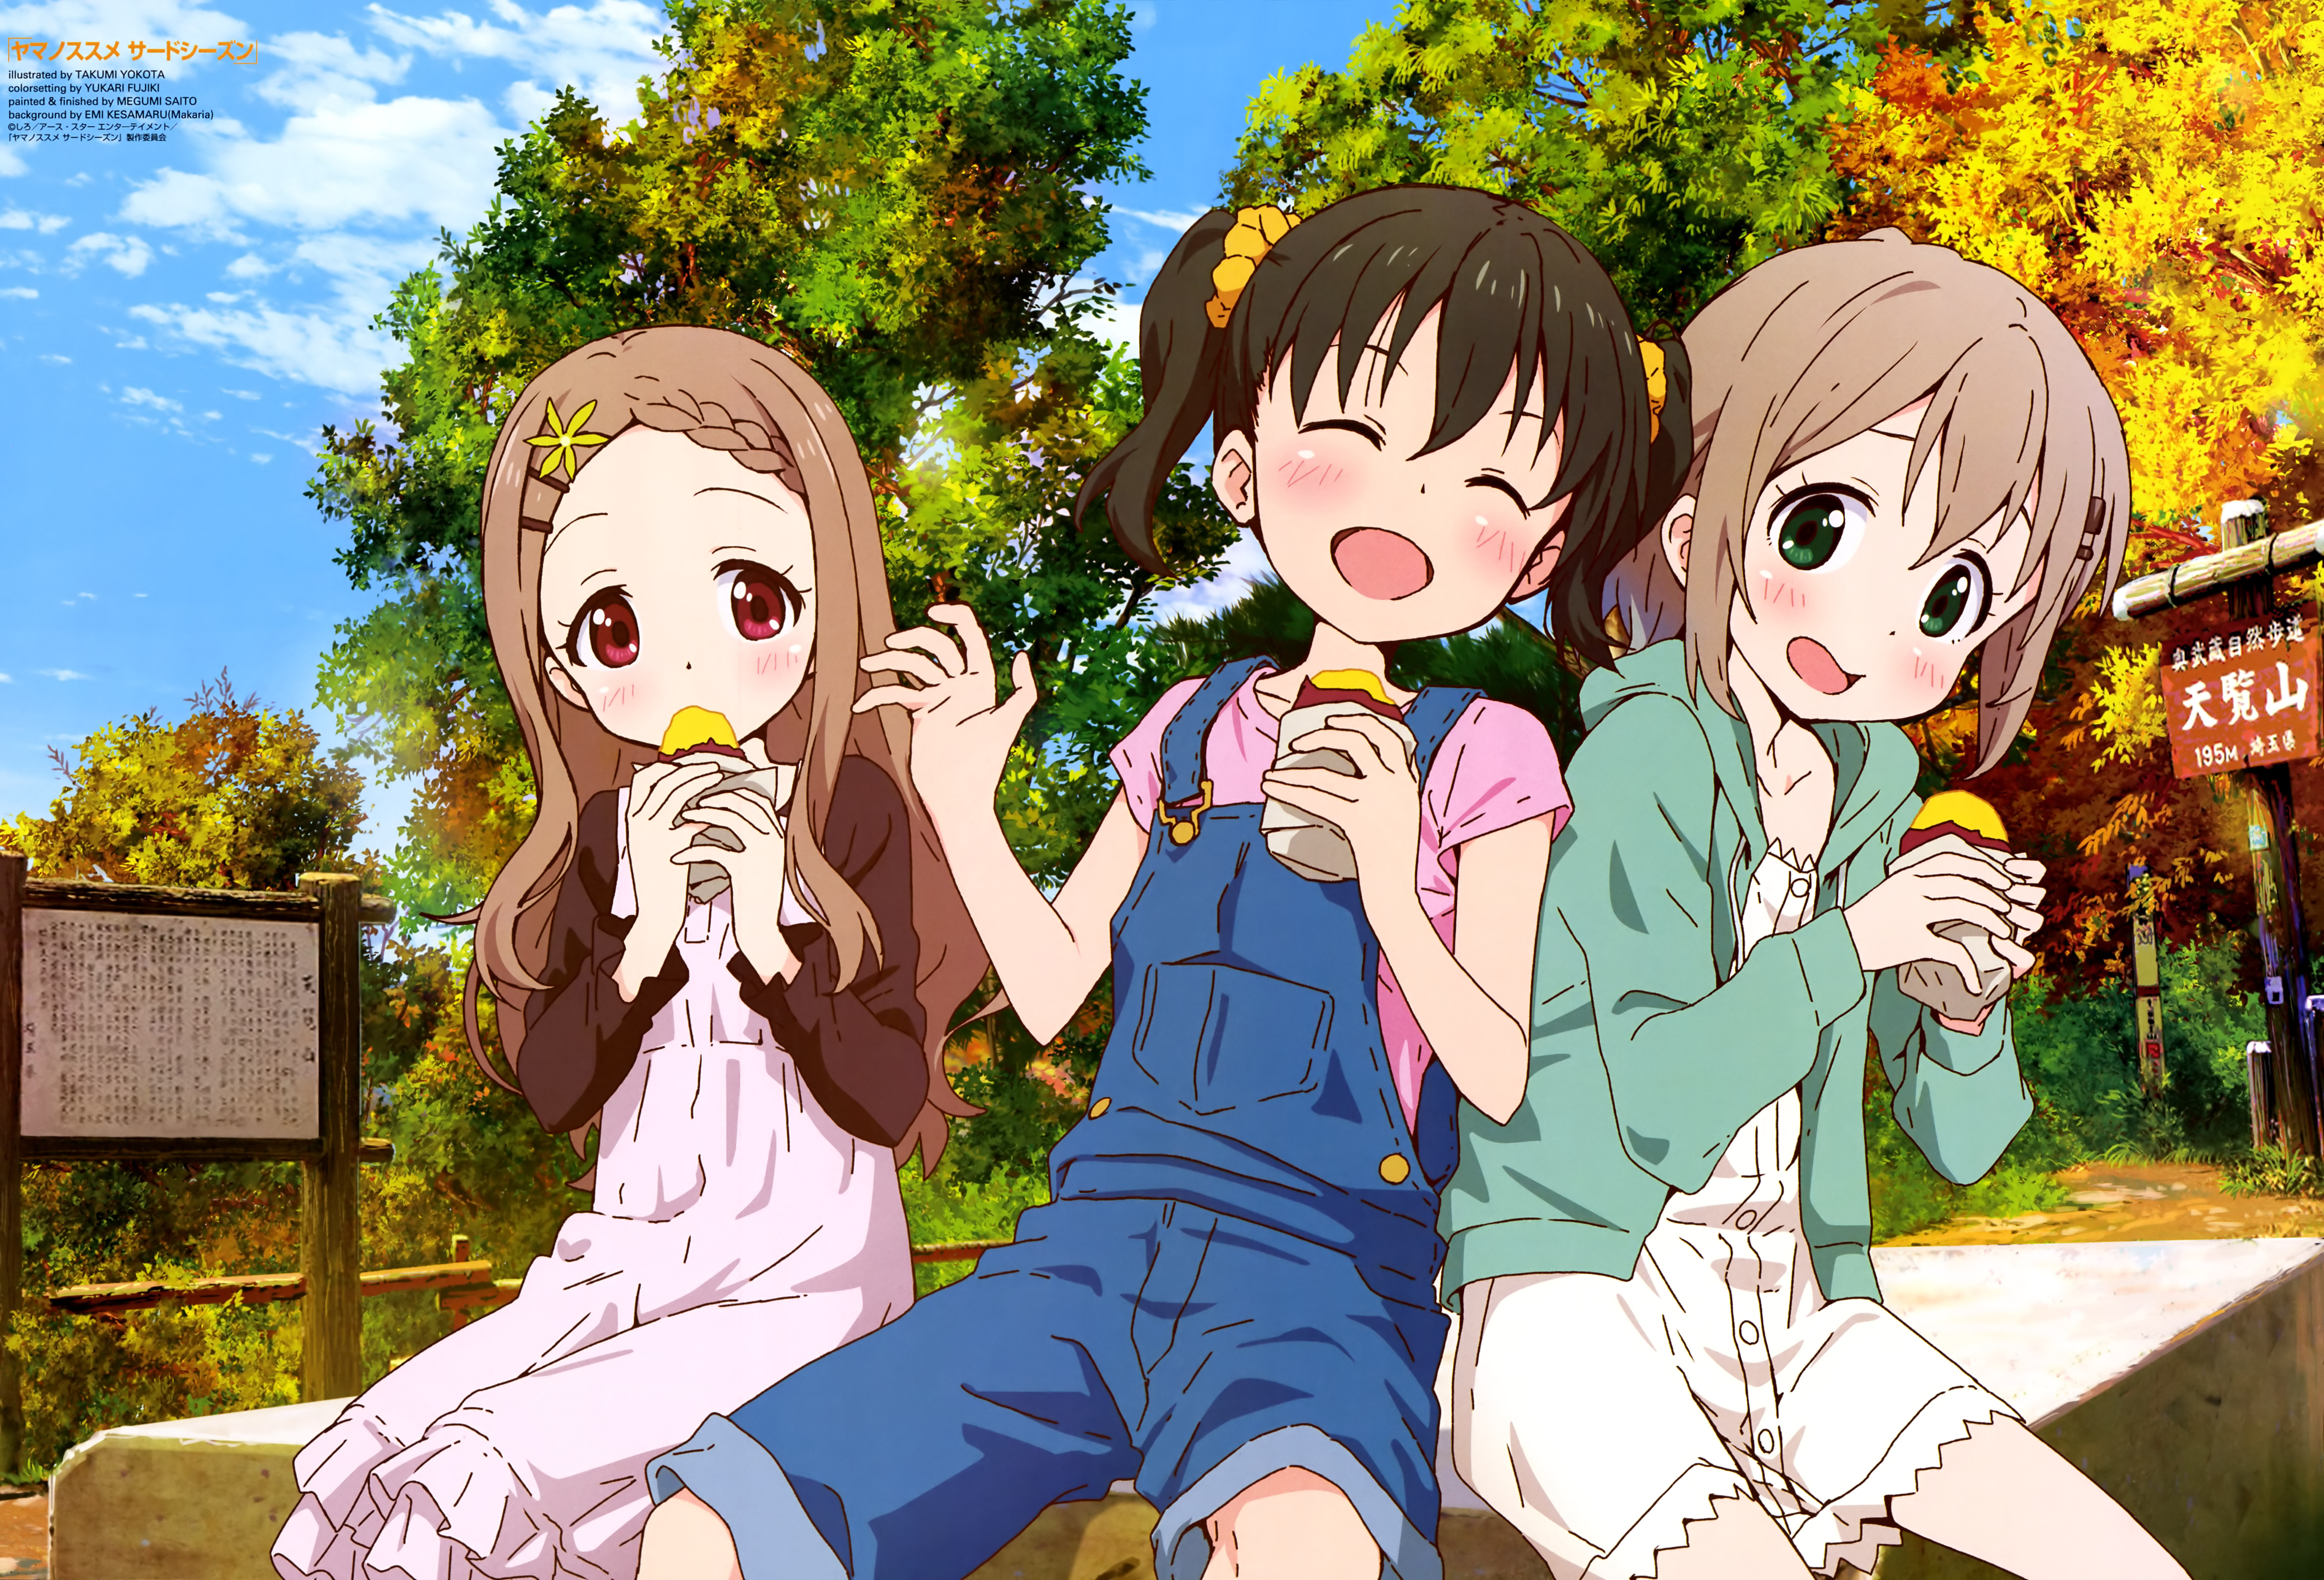 Encouragement of Climb / Yama no Susume - AN Shows - AN Forums